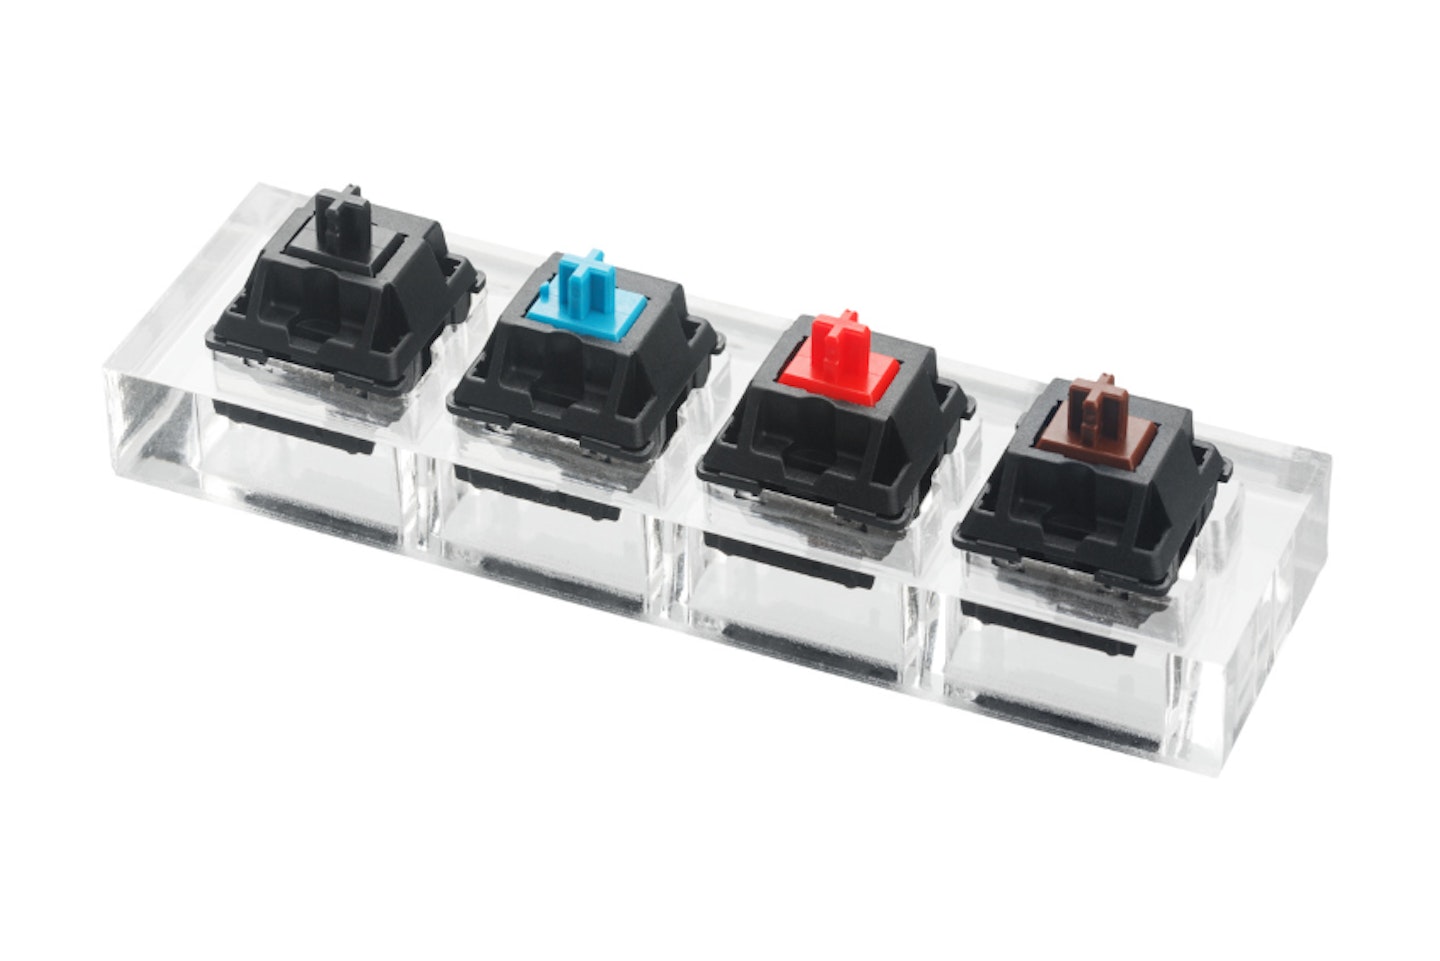 COME MECHANICAL KEYBOARD SWITCHES